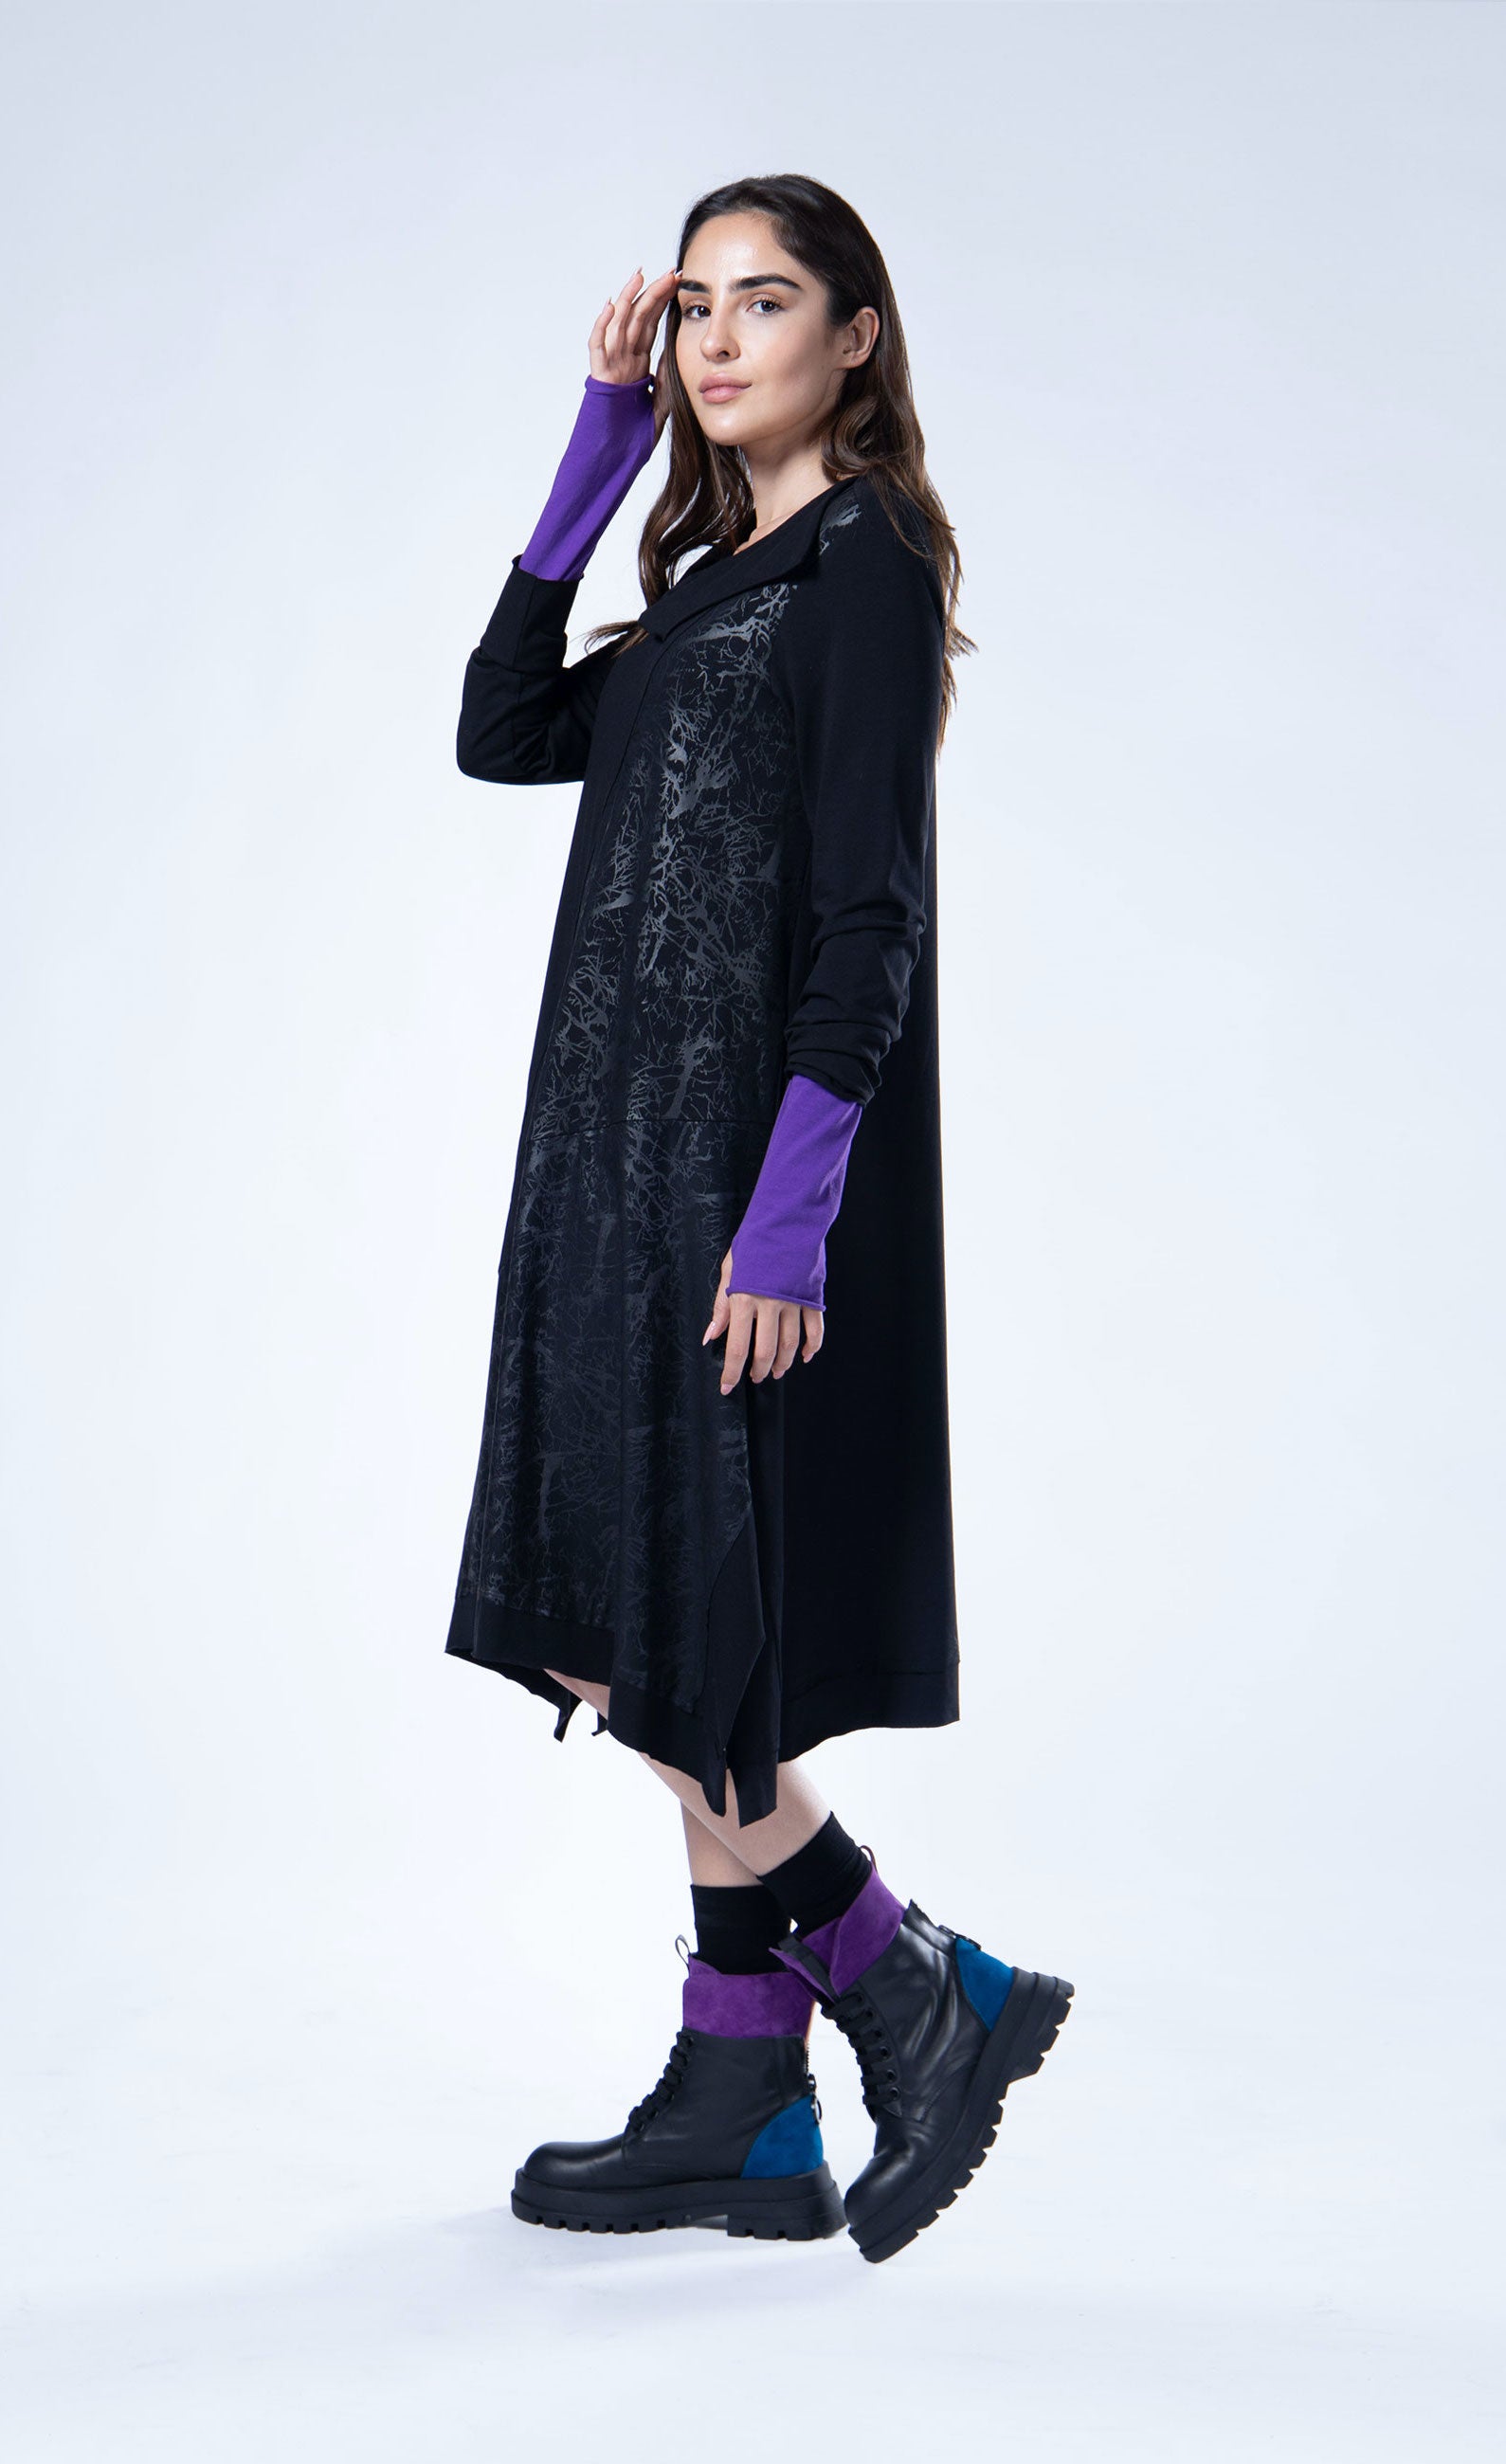 Left side full body view of the luukaa Black Branch Dress. This dress has long sleeves, a cowl neck, an a-line silhouette, and a front glossy branch-like print running diagonally across the body.